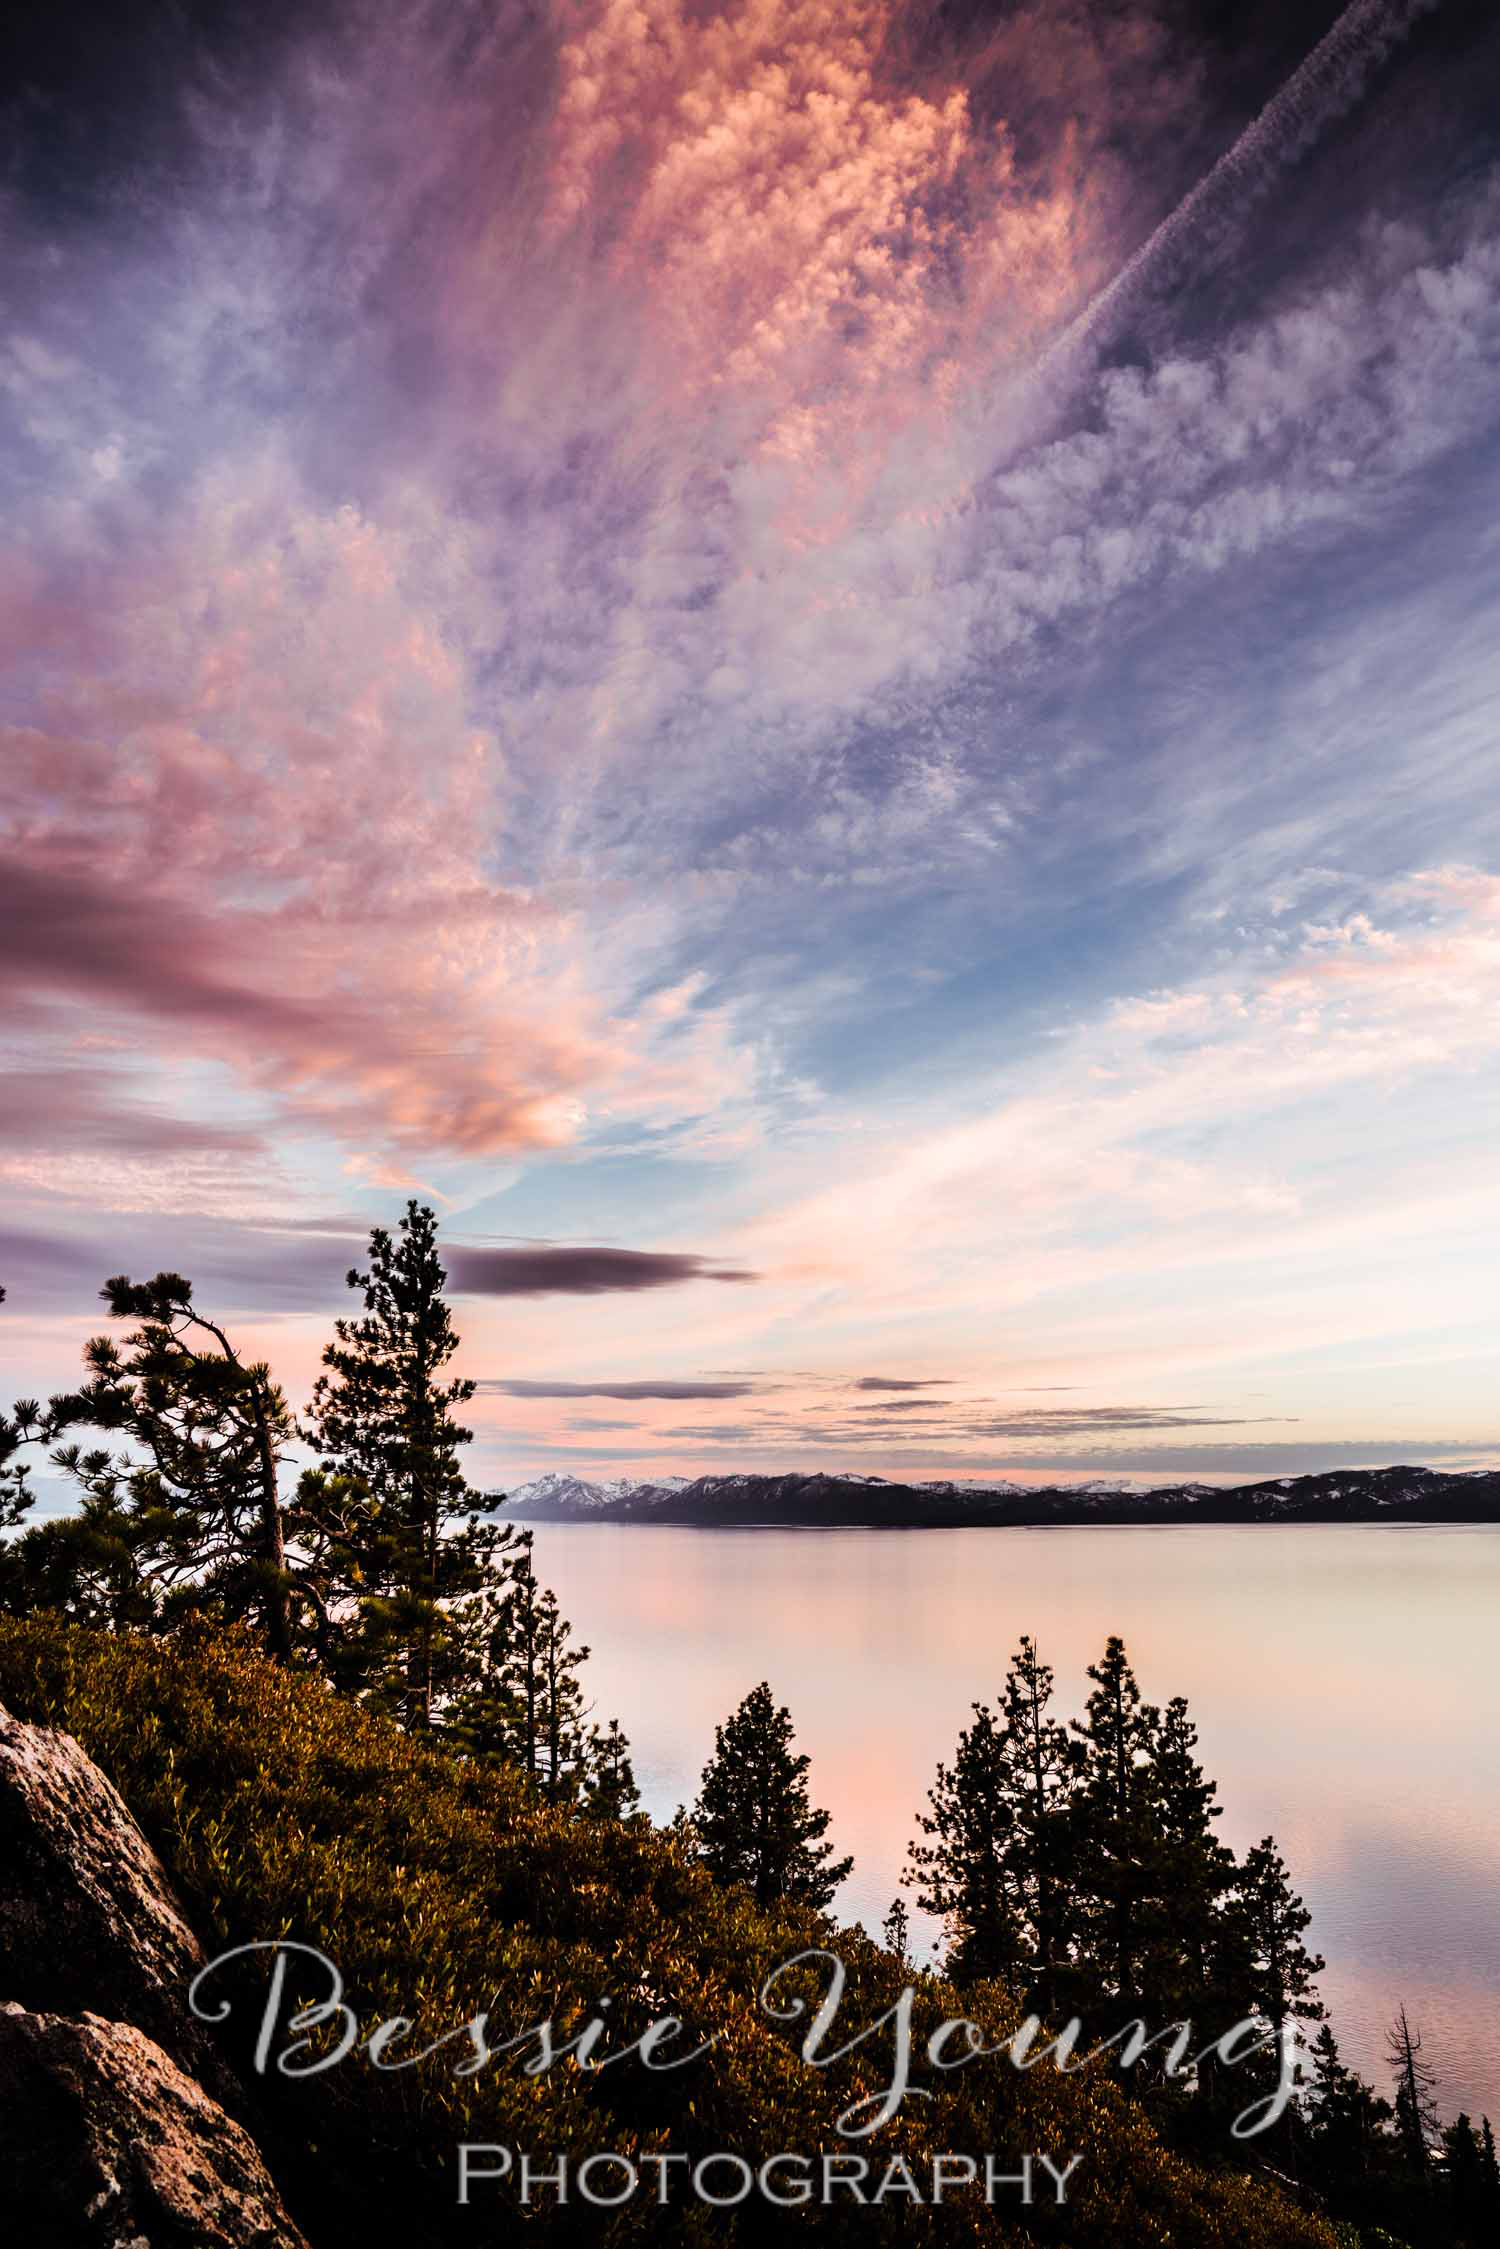 Lake Tahoe Photograph by Bessie Young Photography 2018.jpg